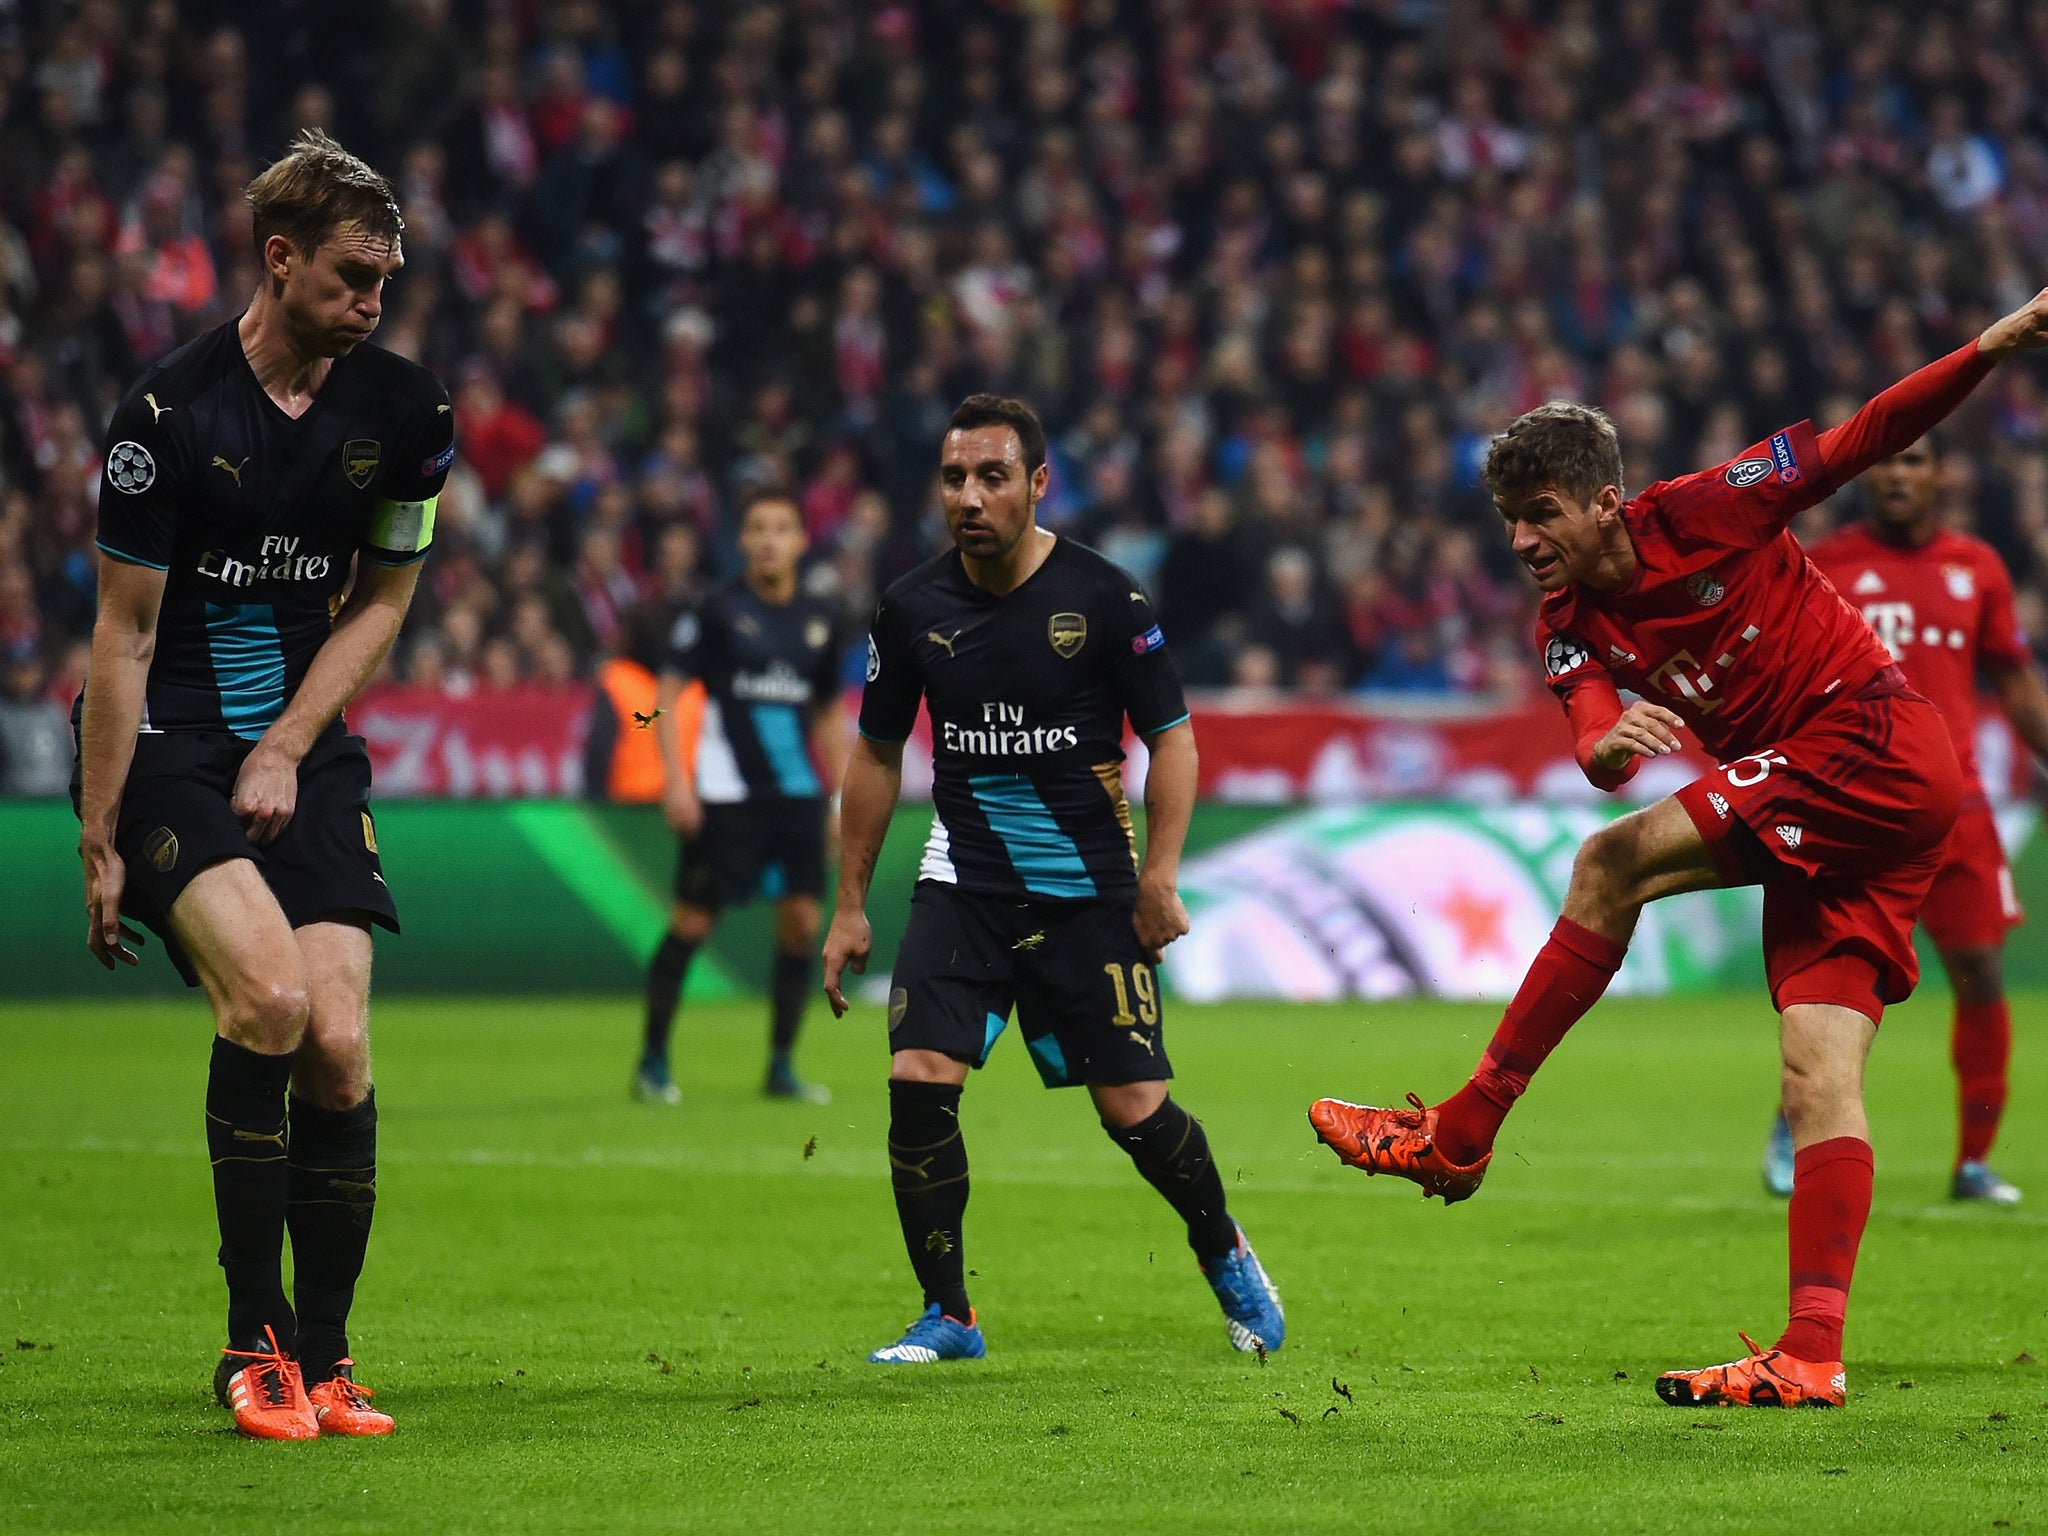 Thomas Muller scores his first goal for Bayern Munich